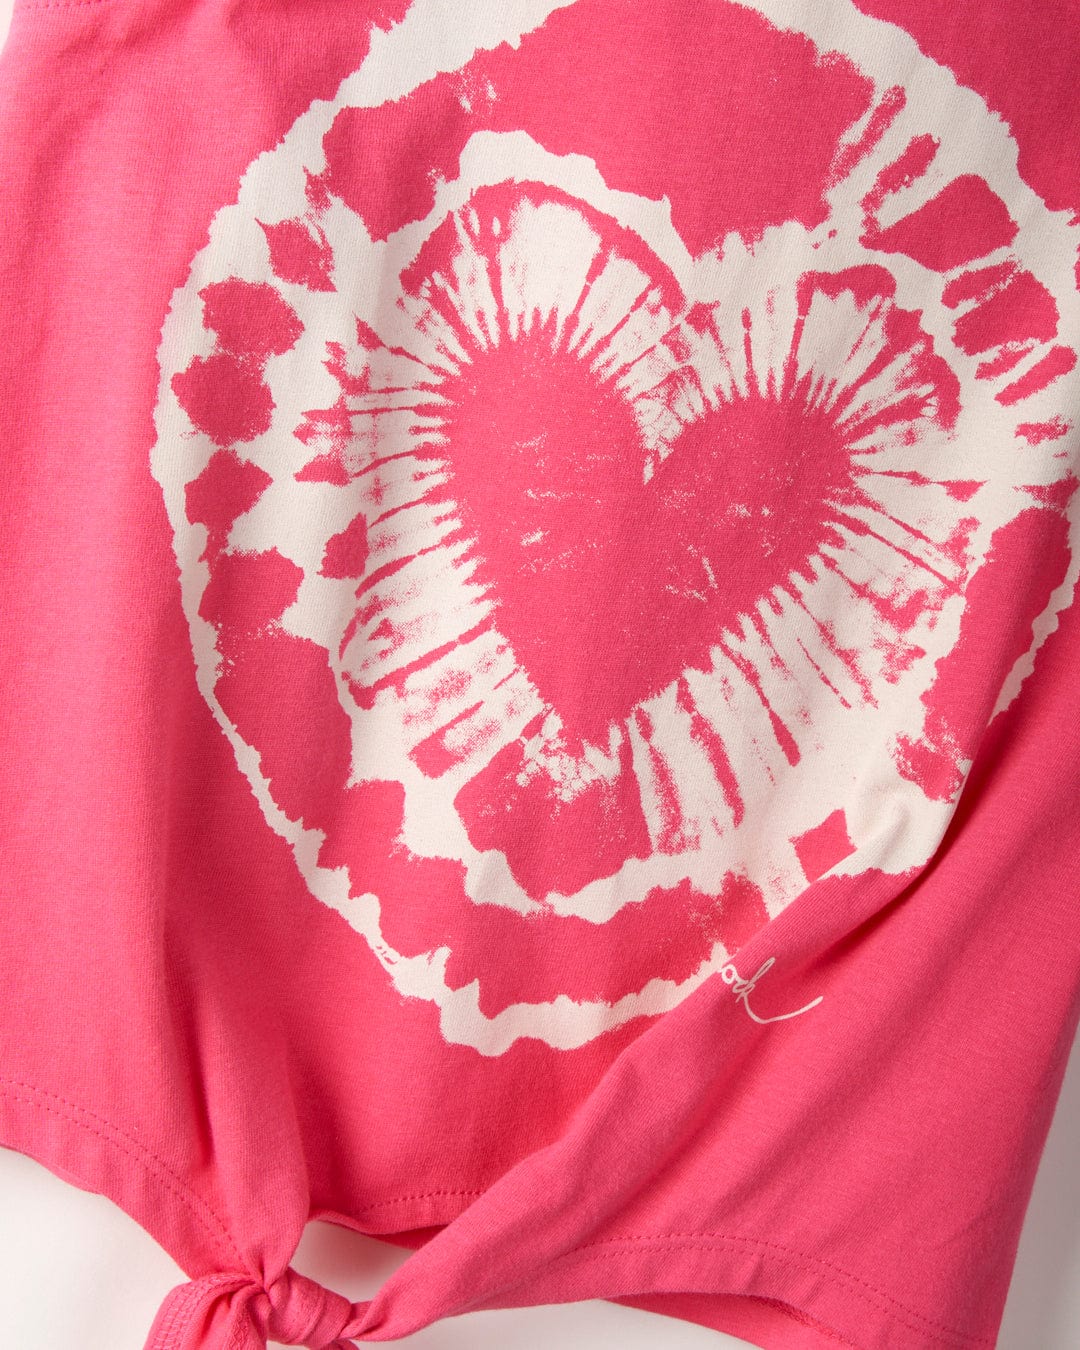 Close-up of a pink cotton Tie Dye Heart - Kids Tie Front Vest - Pink by Saltrock featuring a white circular pattern and a prominent heart shape in the center.